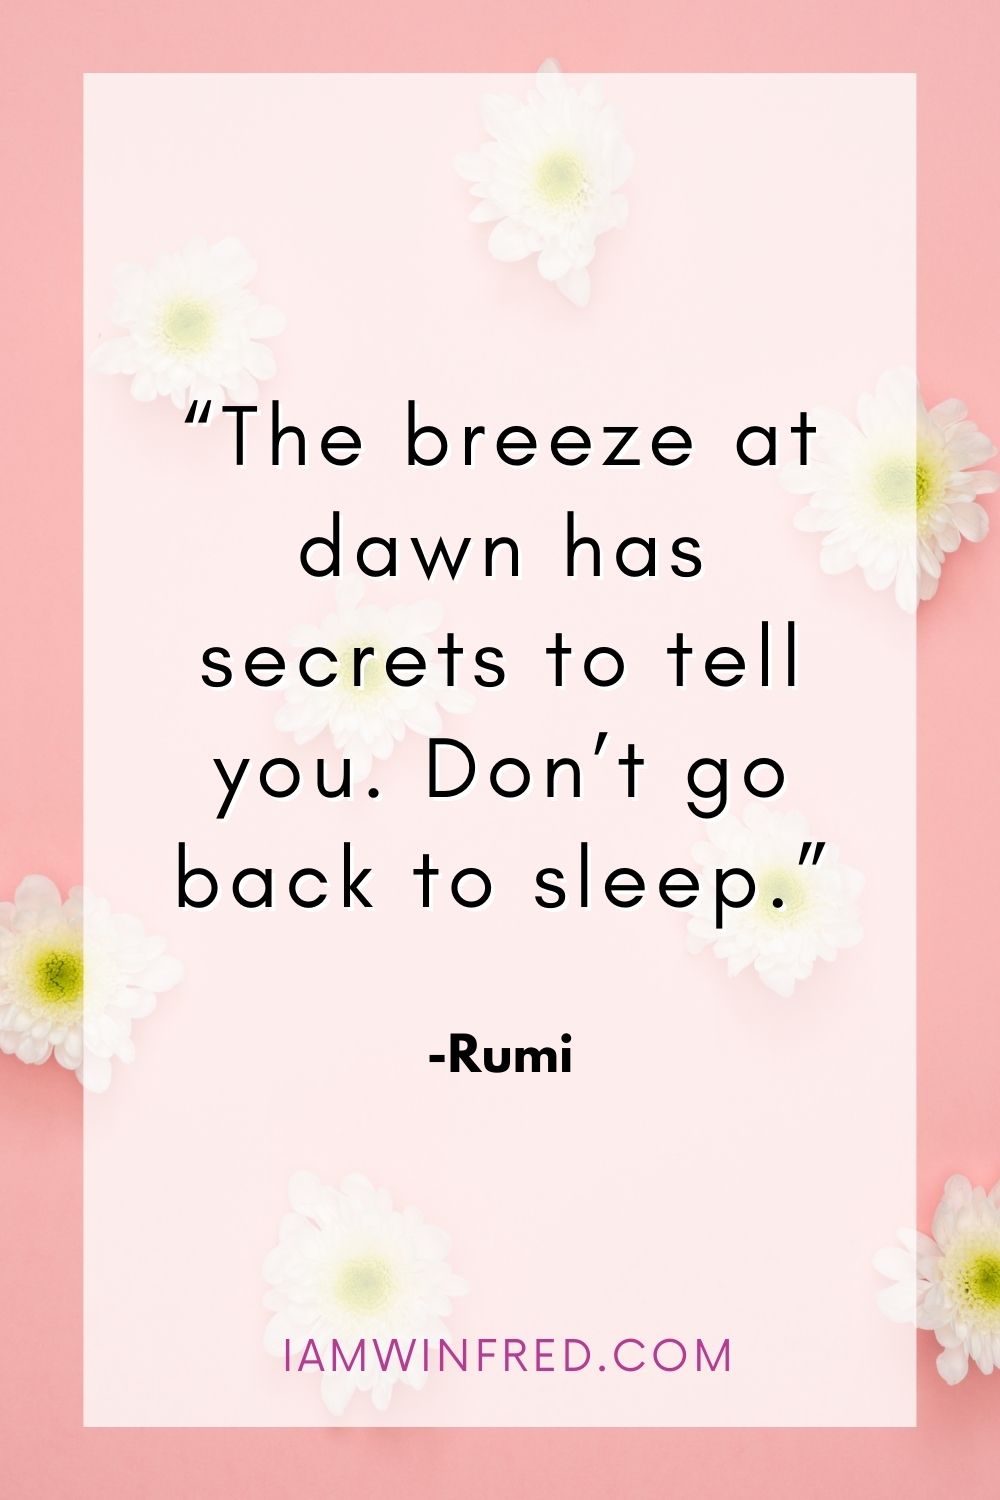 The Breeze At Dawn Has Secrets To Tell You. Dont Go Back To Sleep.